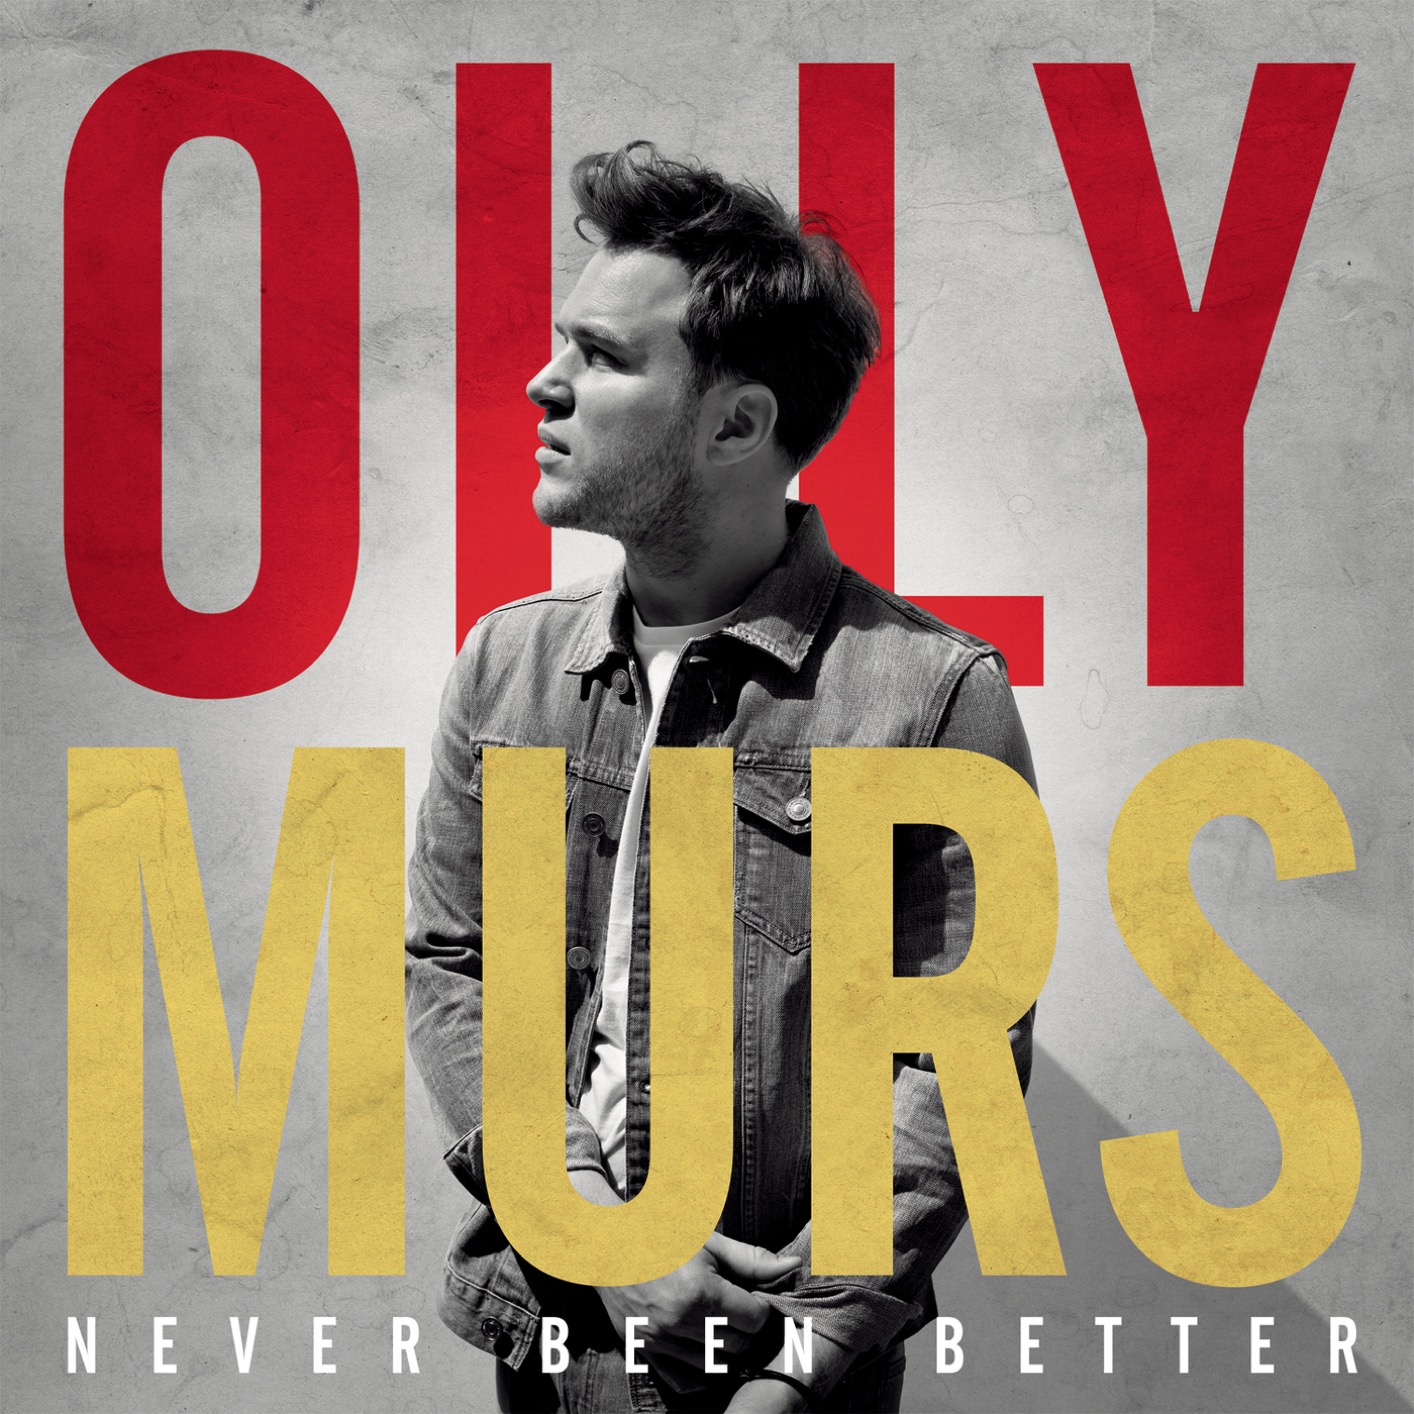 Olly Murs – Never Been Better (Expanded Edition) (2014/2020) [FLAC 24bit/44,1kHz]